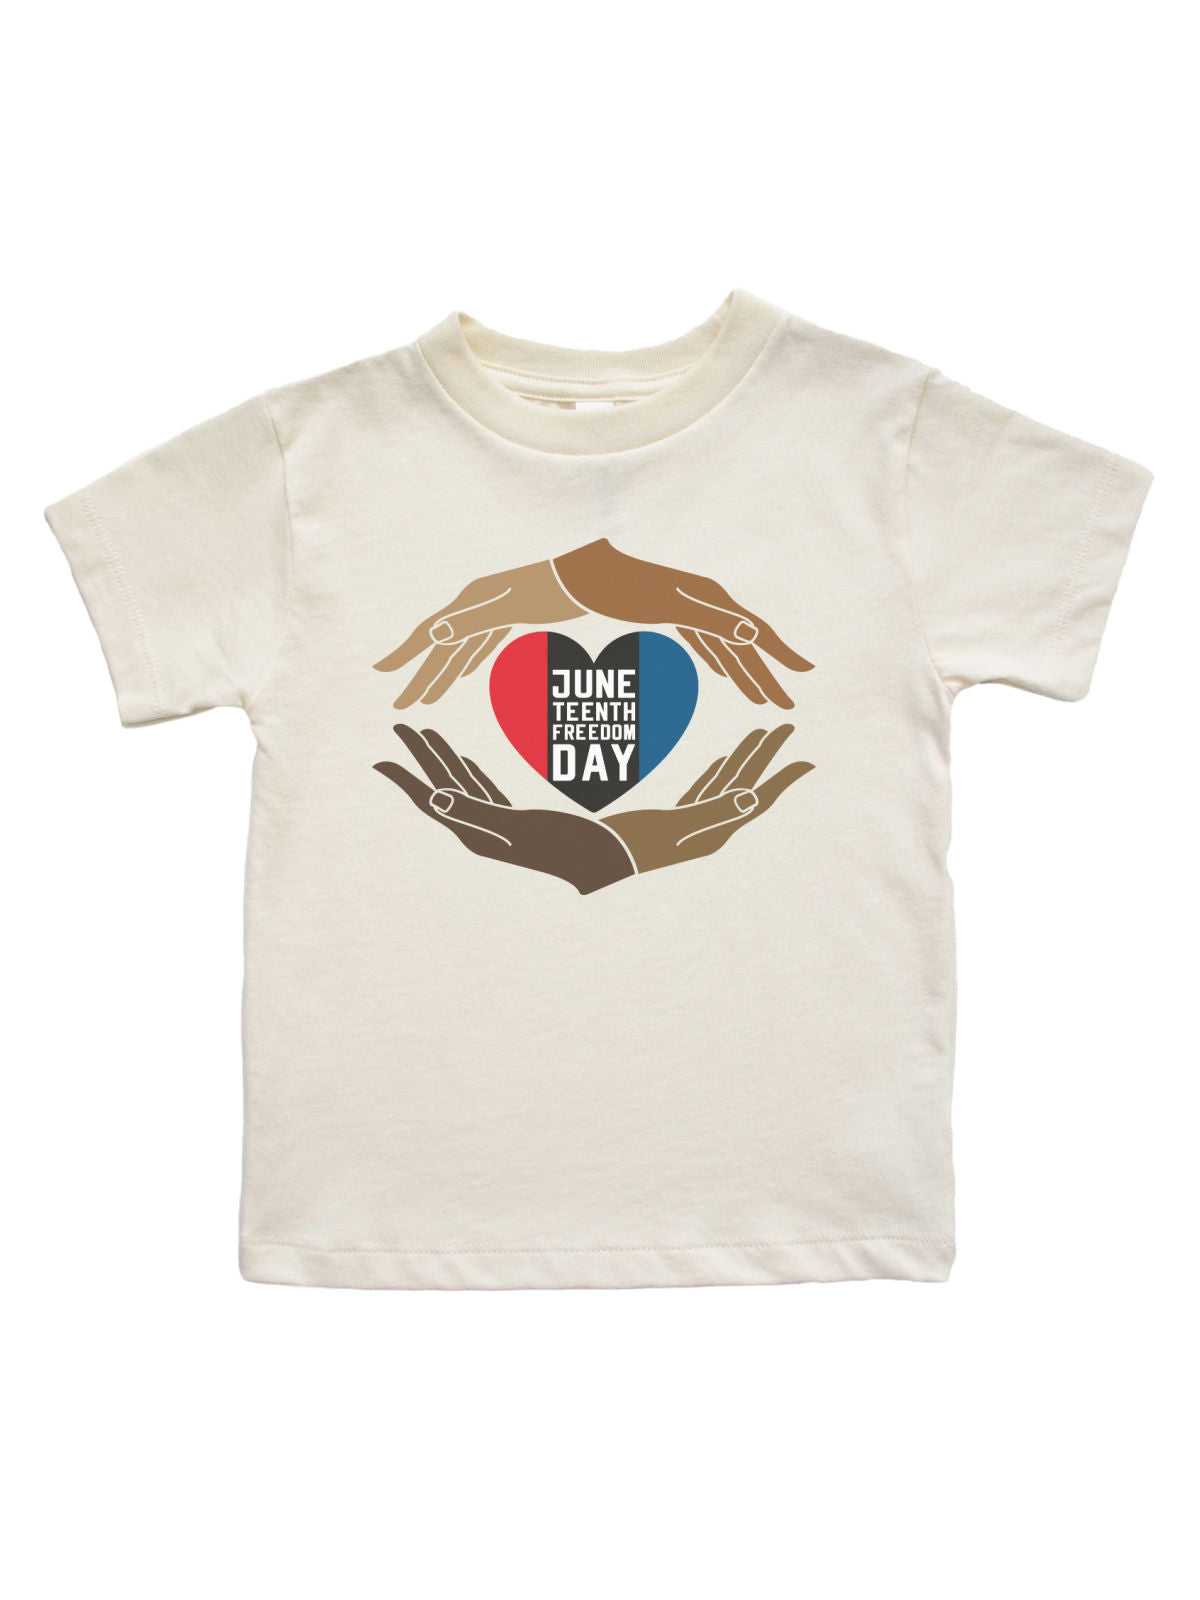 Hands of Juneteenth Freedom Day Kids Shirt in Natural